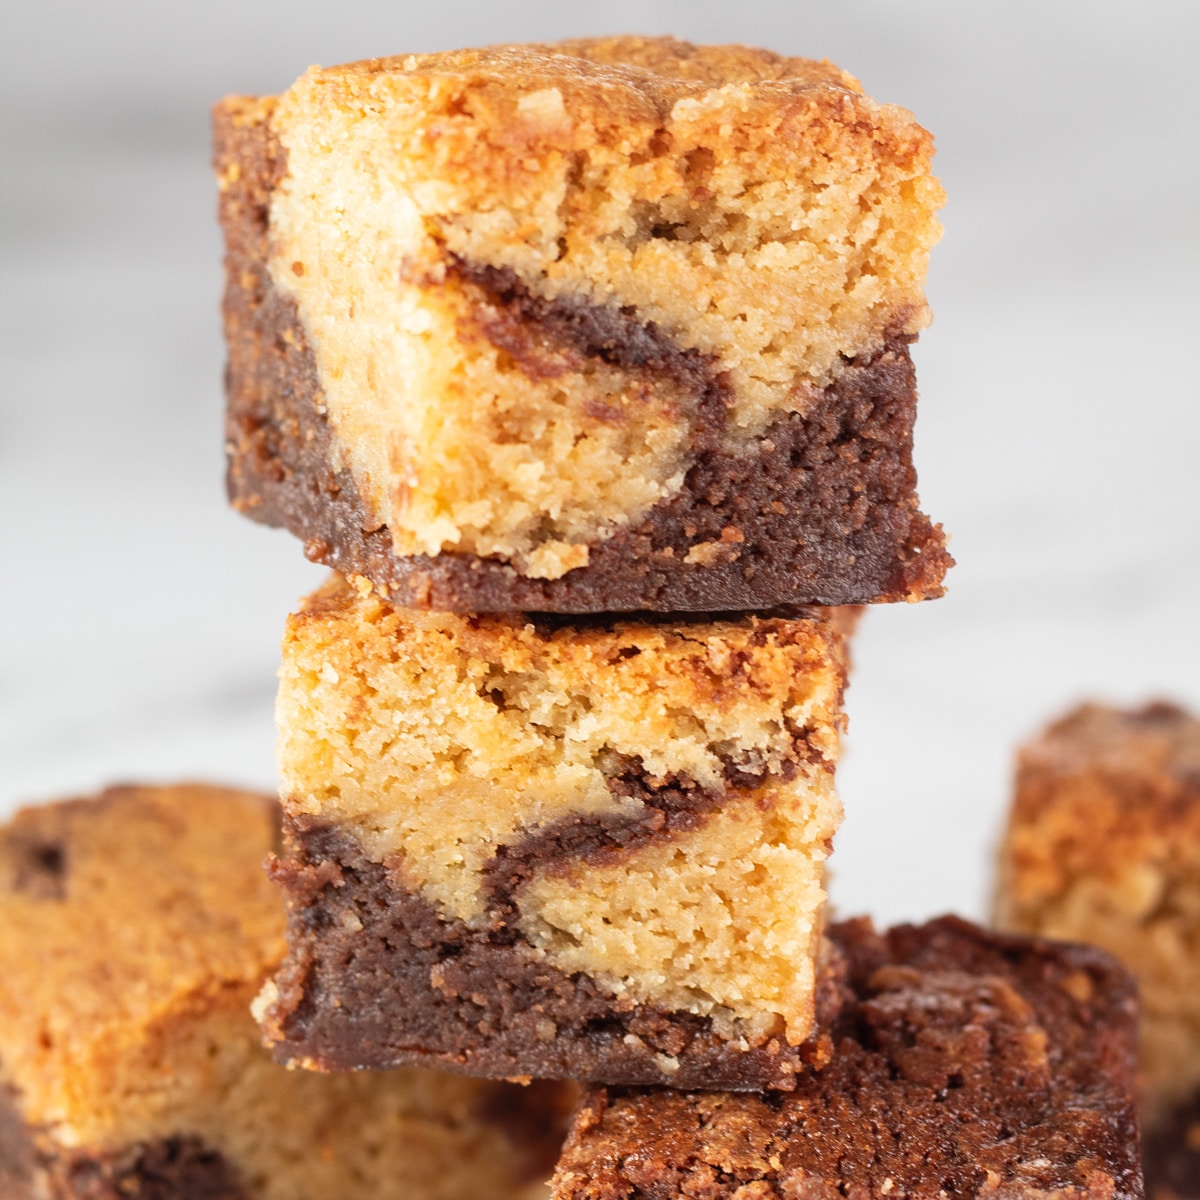 Brownie blondies stacked to show the tasty layers and marbling.